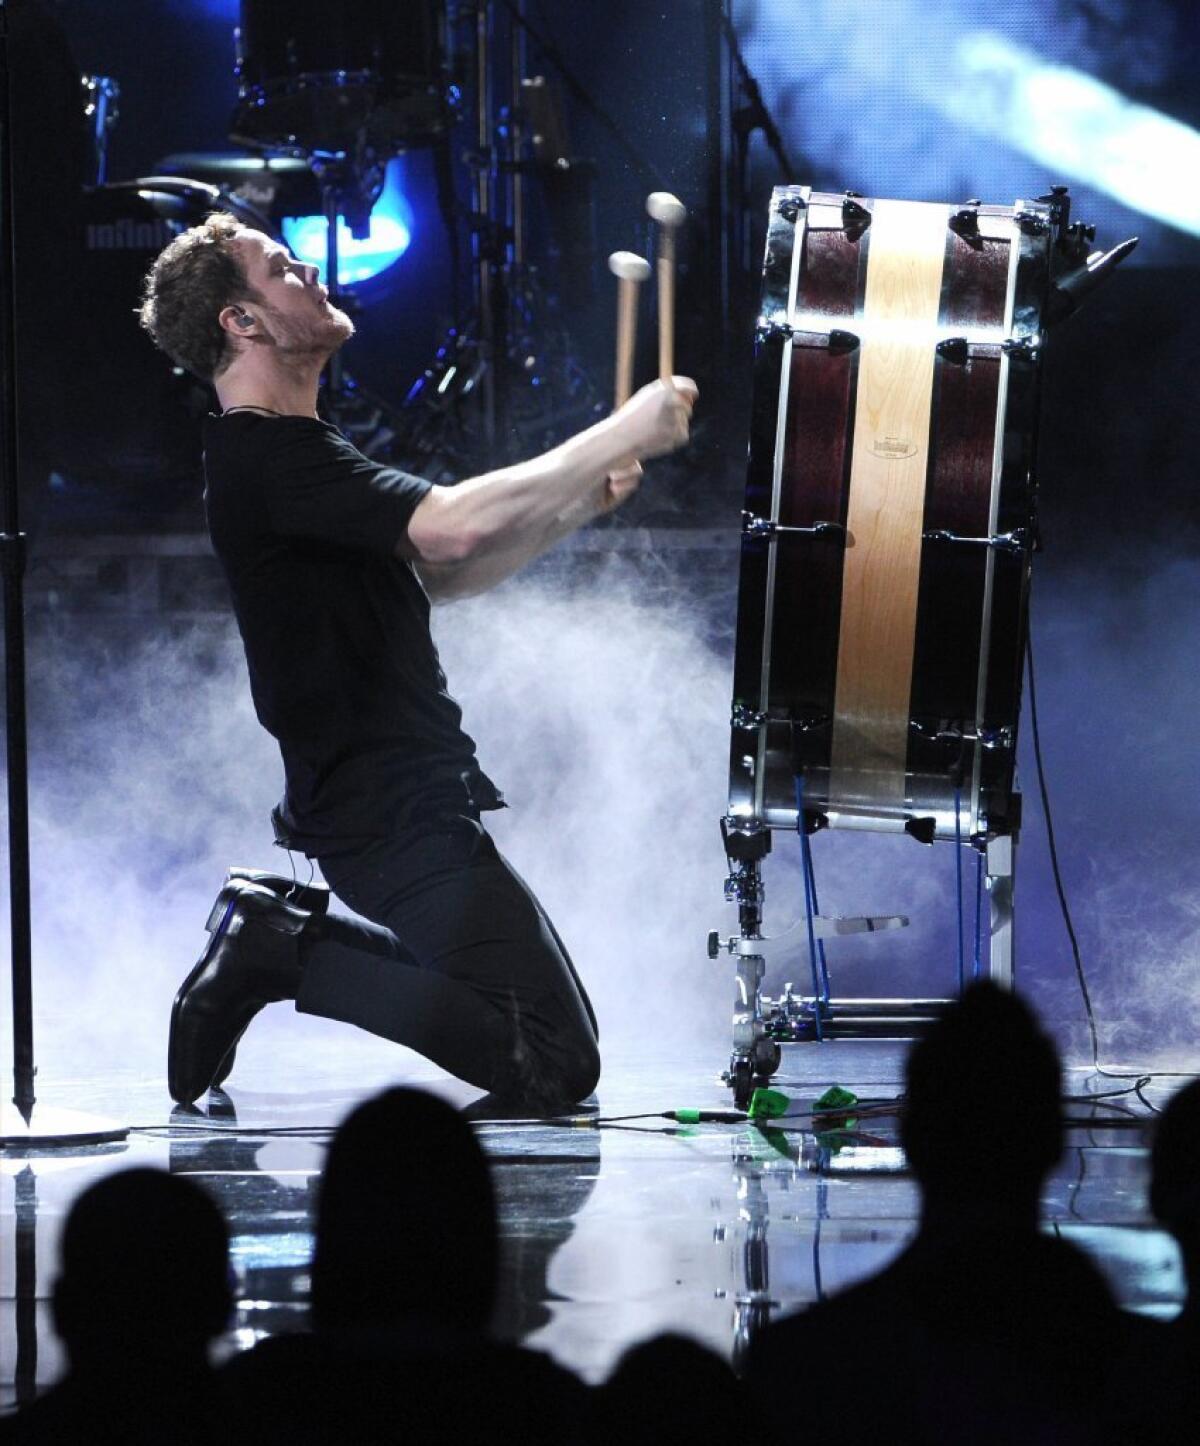 Singer Dan Reynolds of Imagine Dragons performs during the 2013 American Music Awards at Nokia Theatre L.A. Live on Nov. 24, 2013, in Los Angeles,